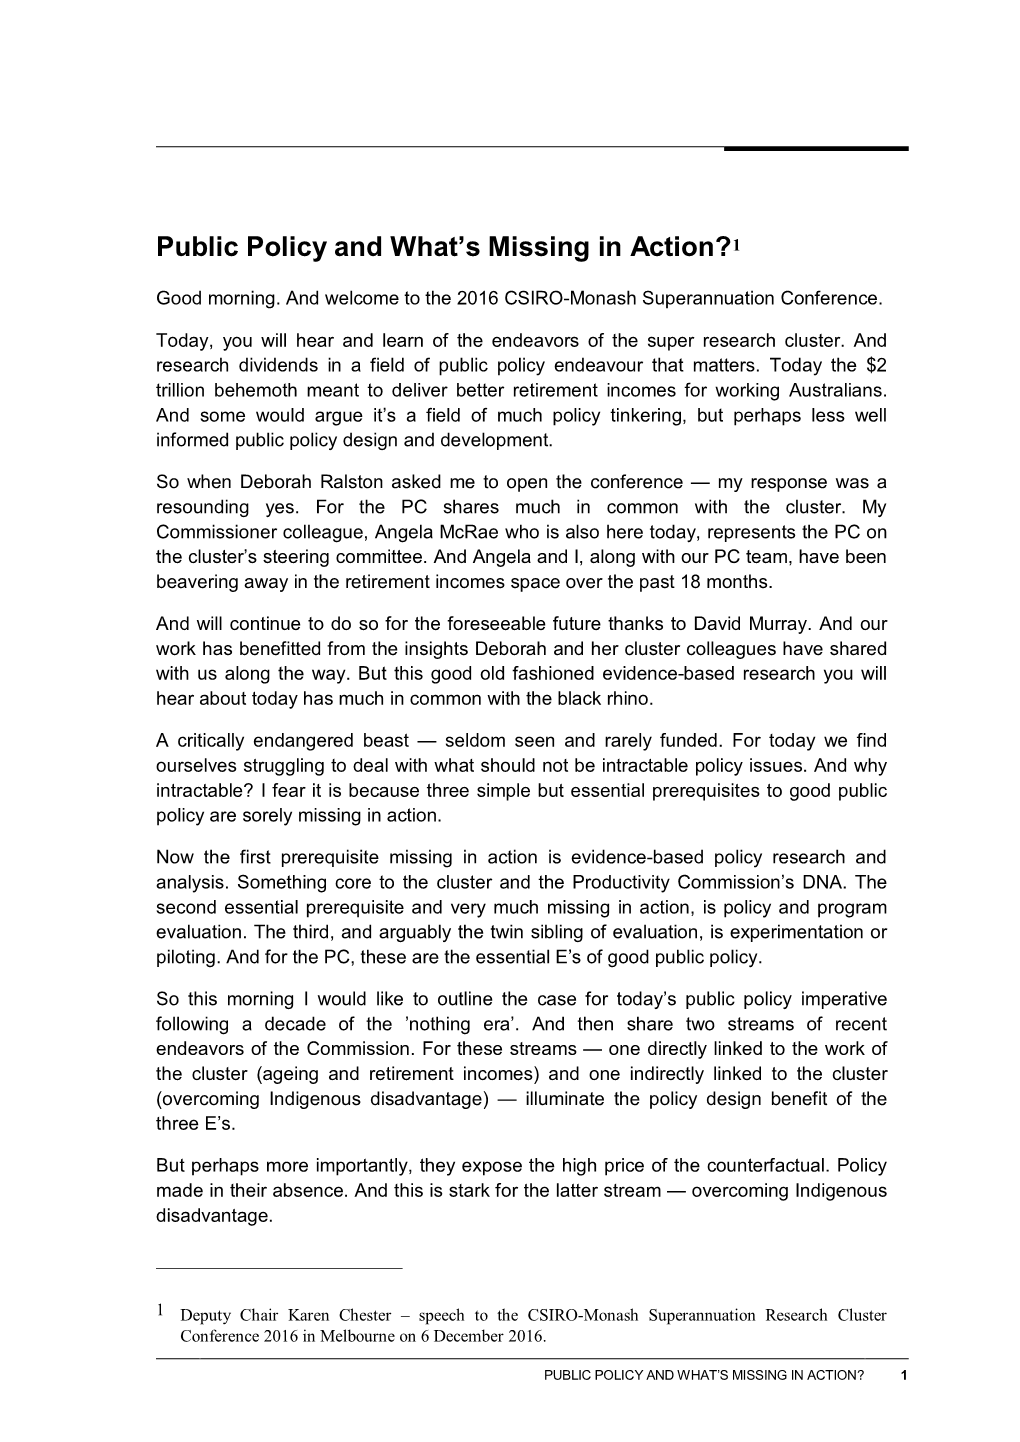 Public Policy and What's Missing in Action?